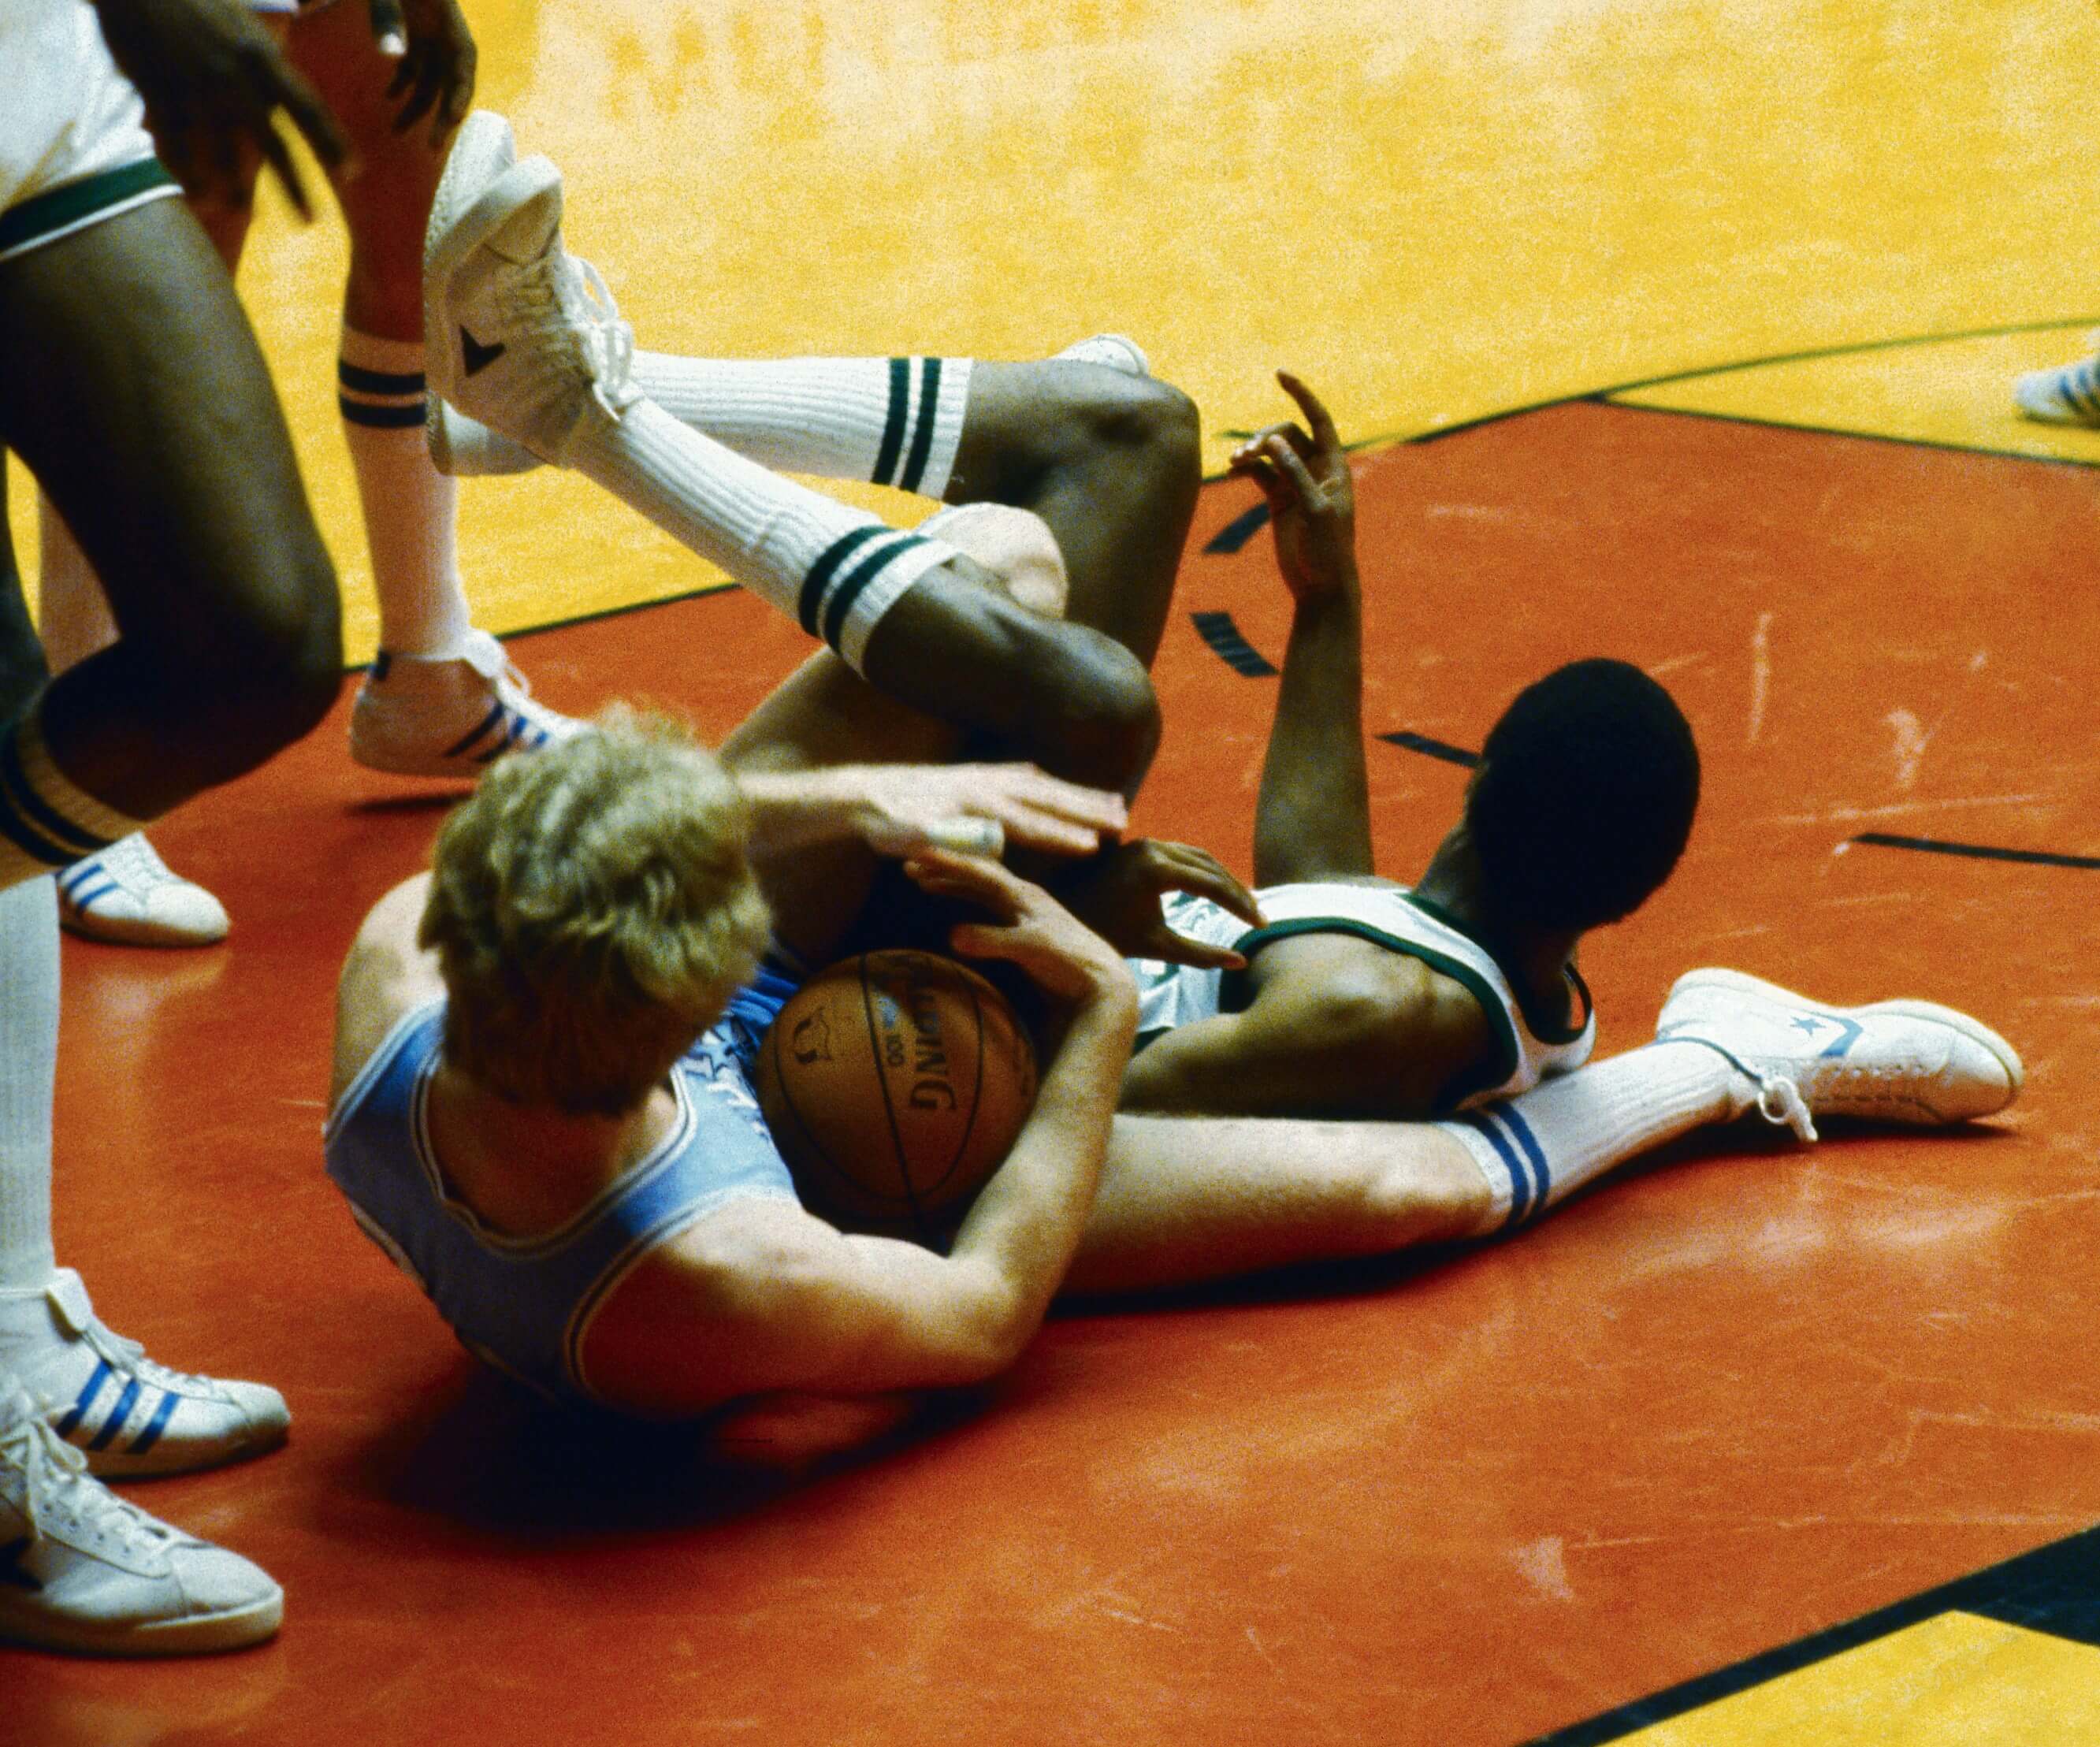 Indiana State's Larry Bird and Michigan State's Earvin Johnson are tangled on the floor.